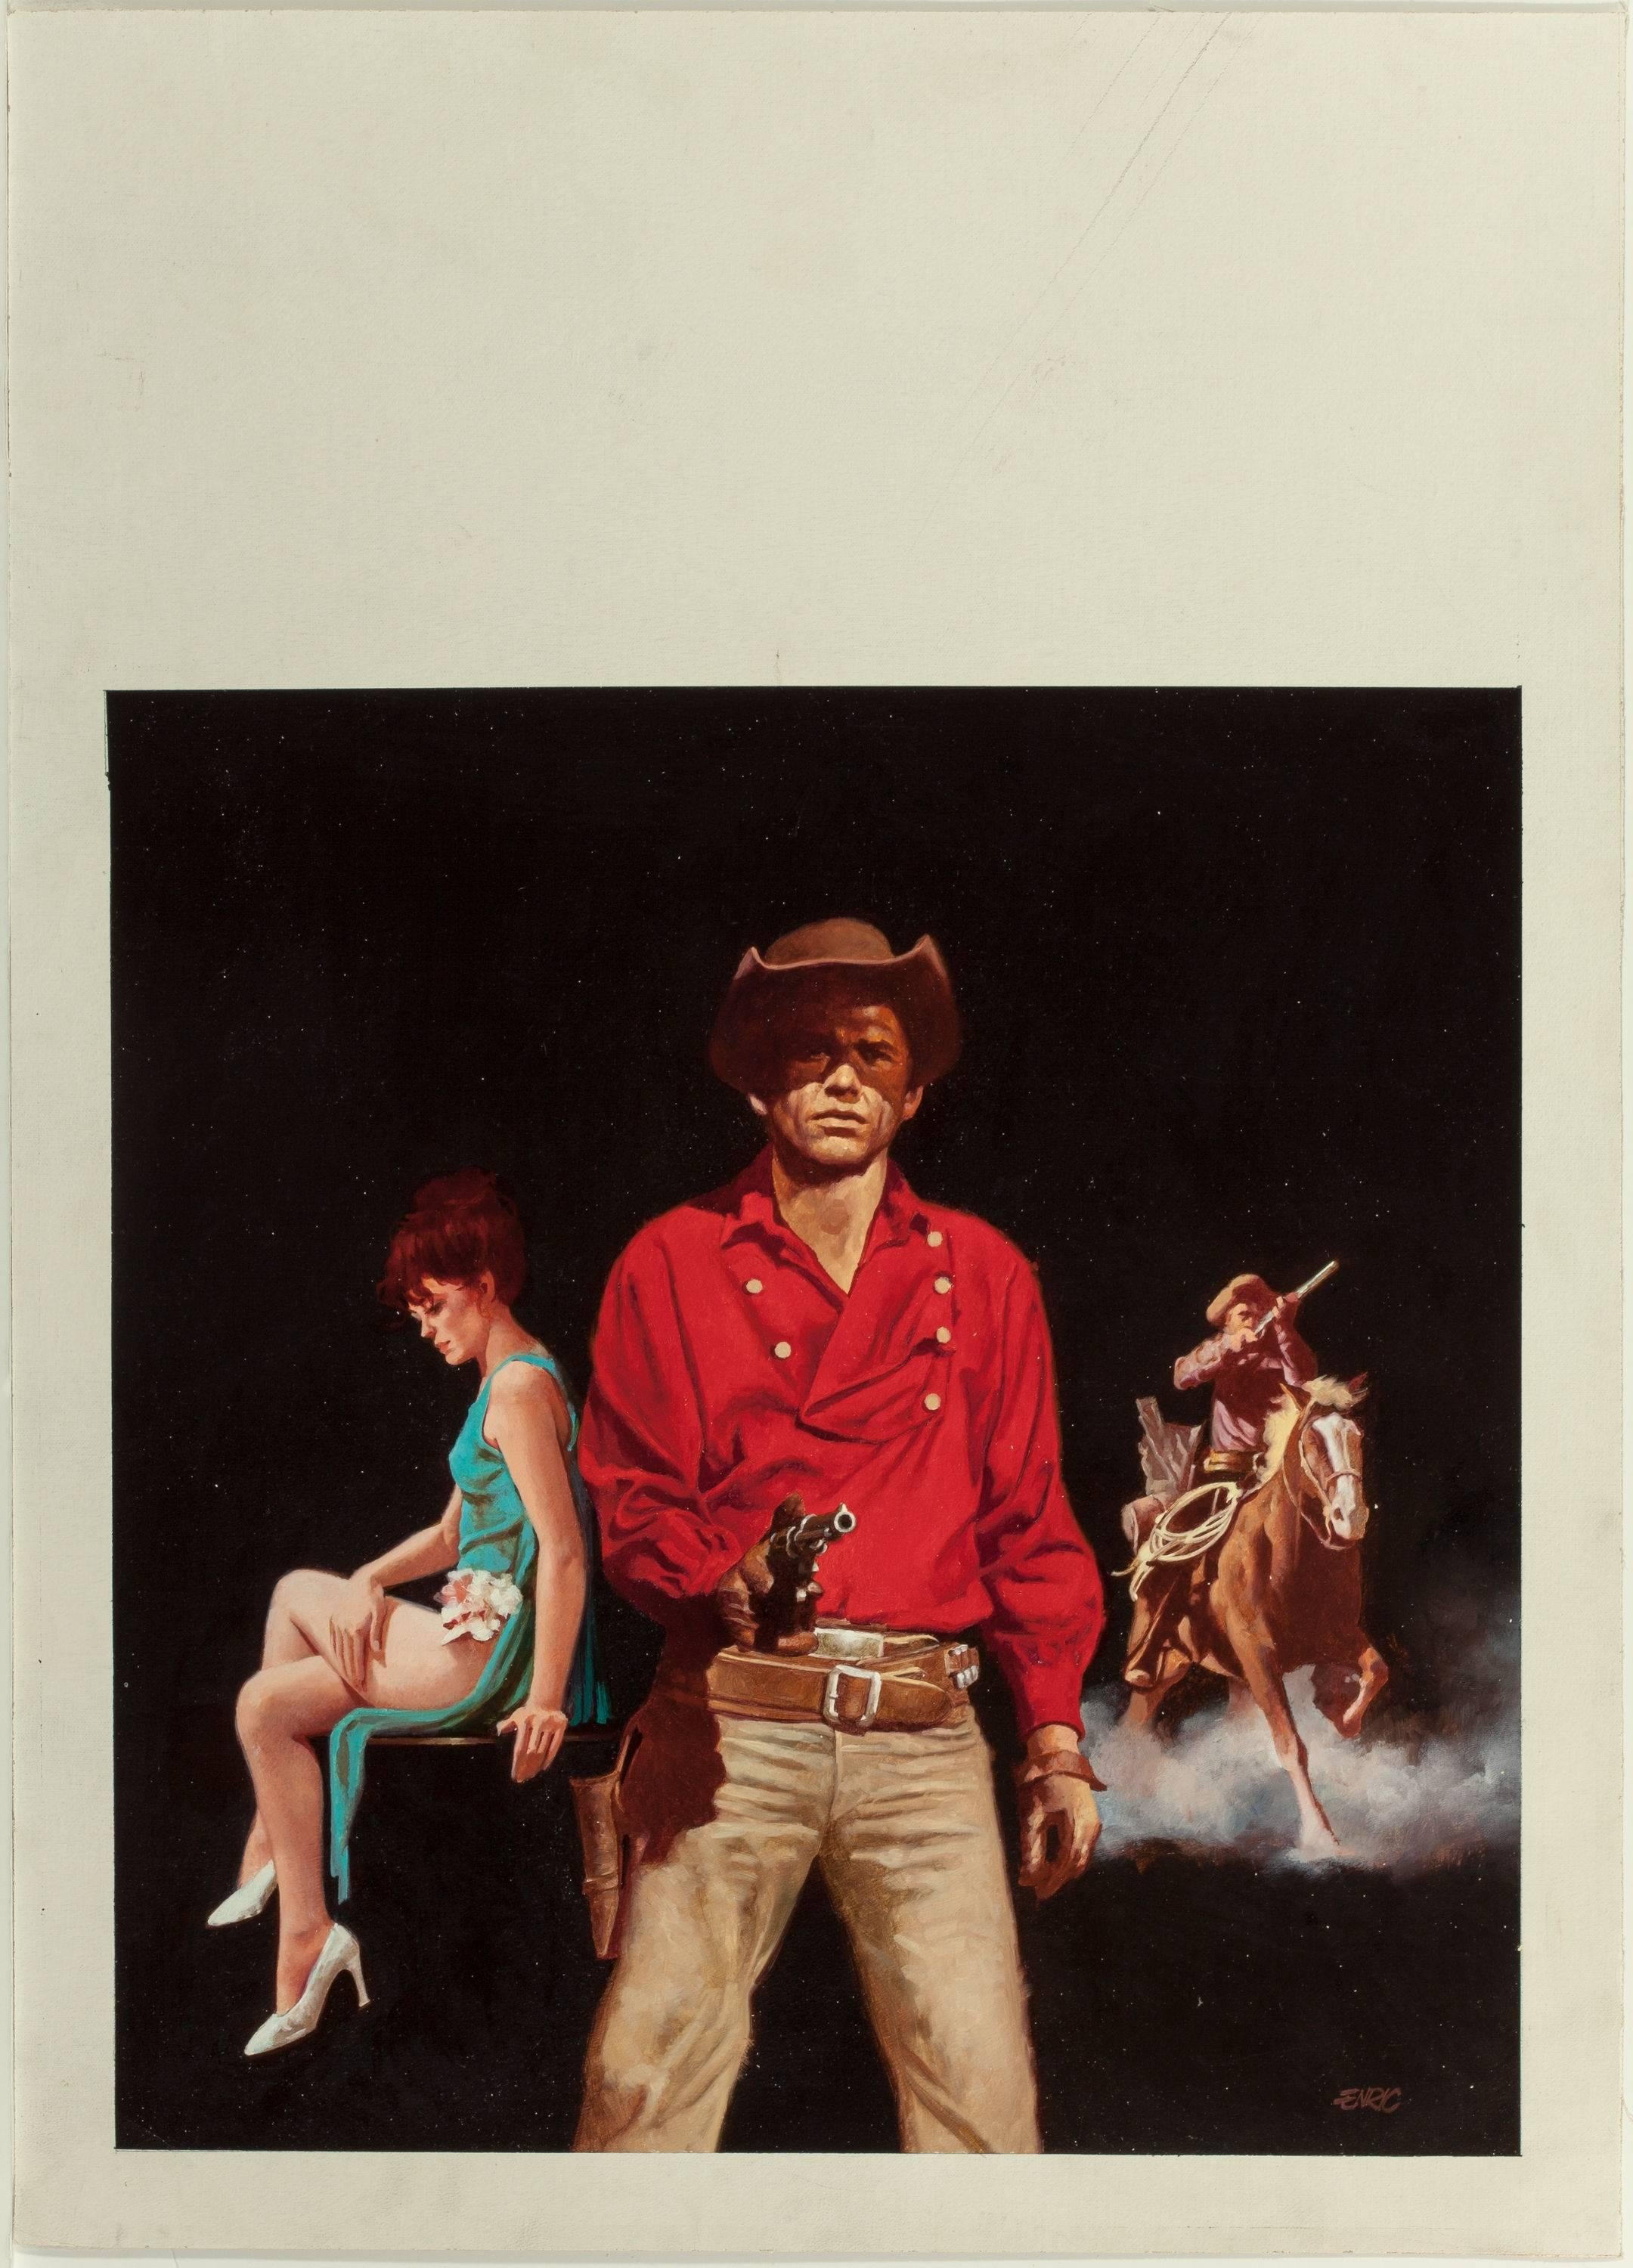 Cowboy Love Story, Paperback Cover - Painting by Enrich Torres